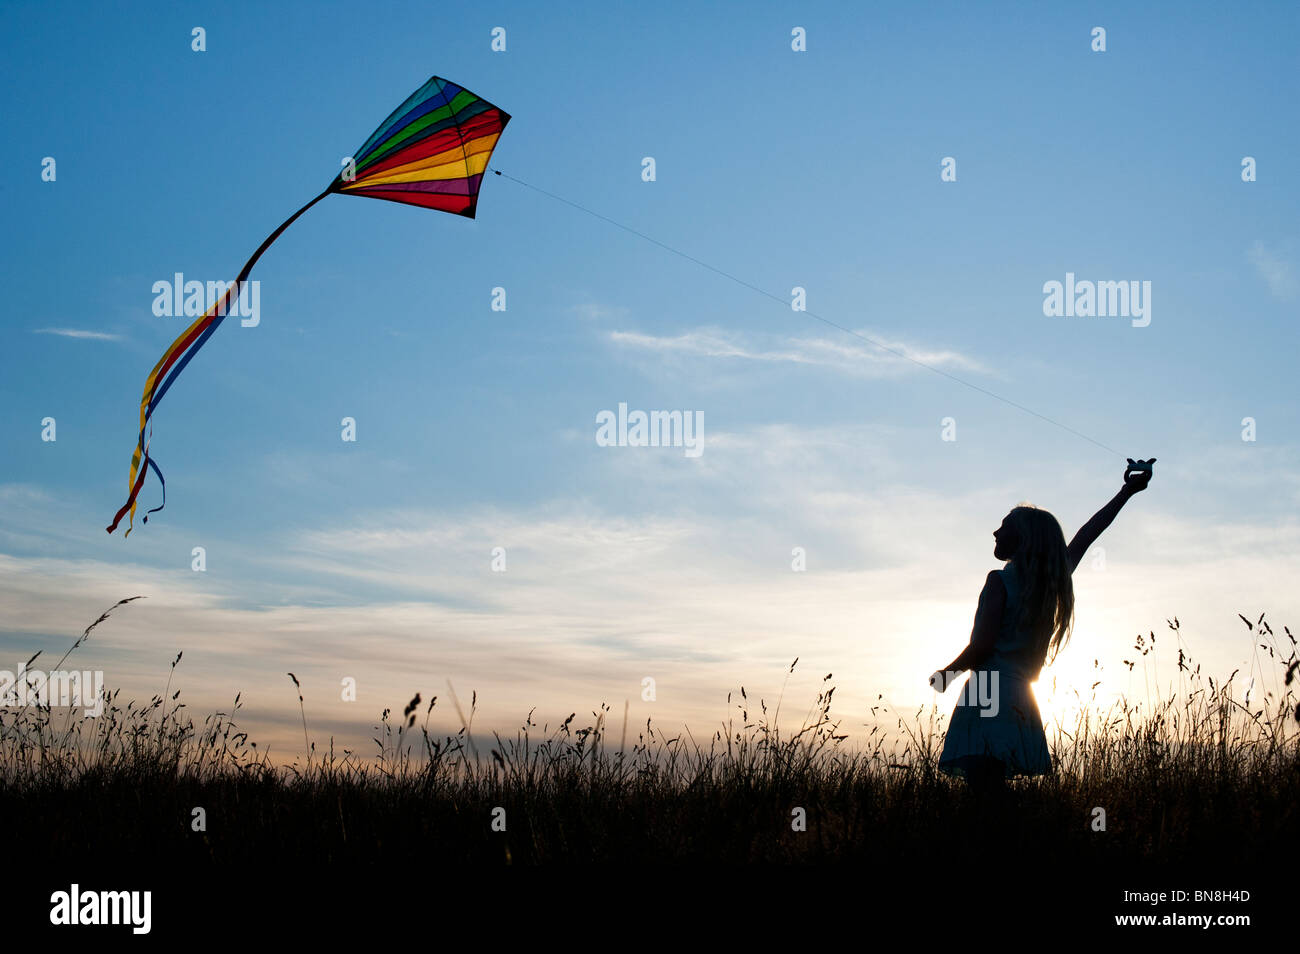 Young Girl having fun flying a multicoloured kite in the English countryside. Silhouette Stock Photo